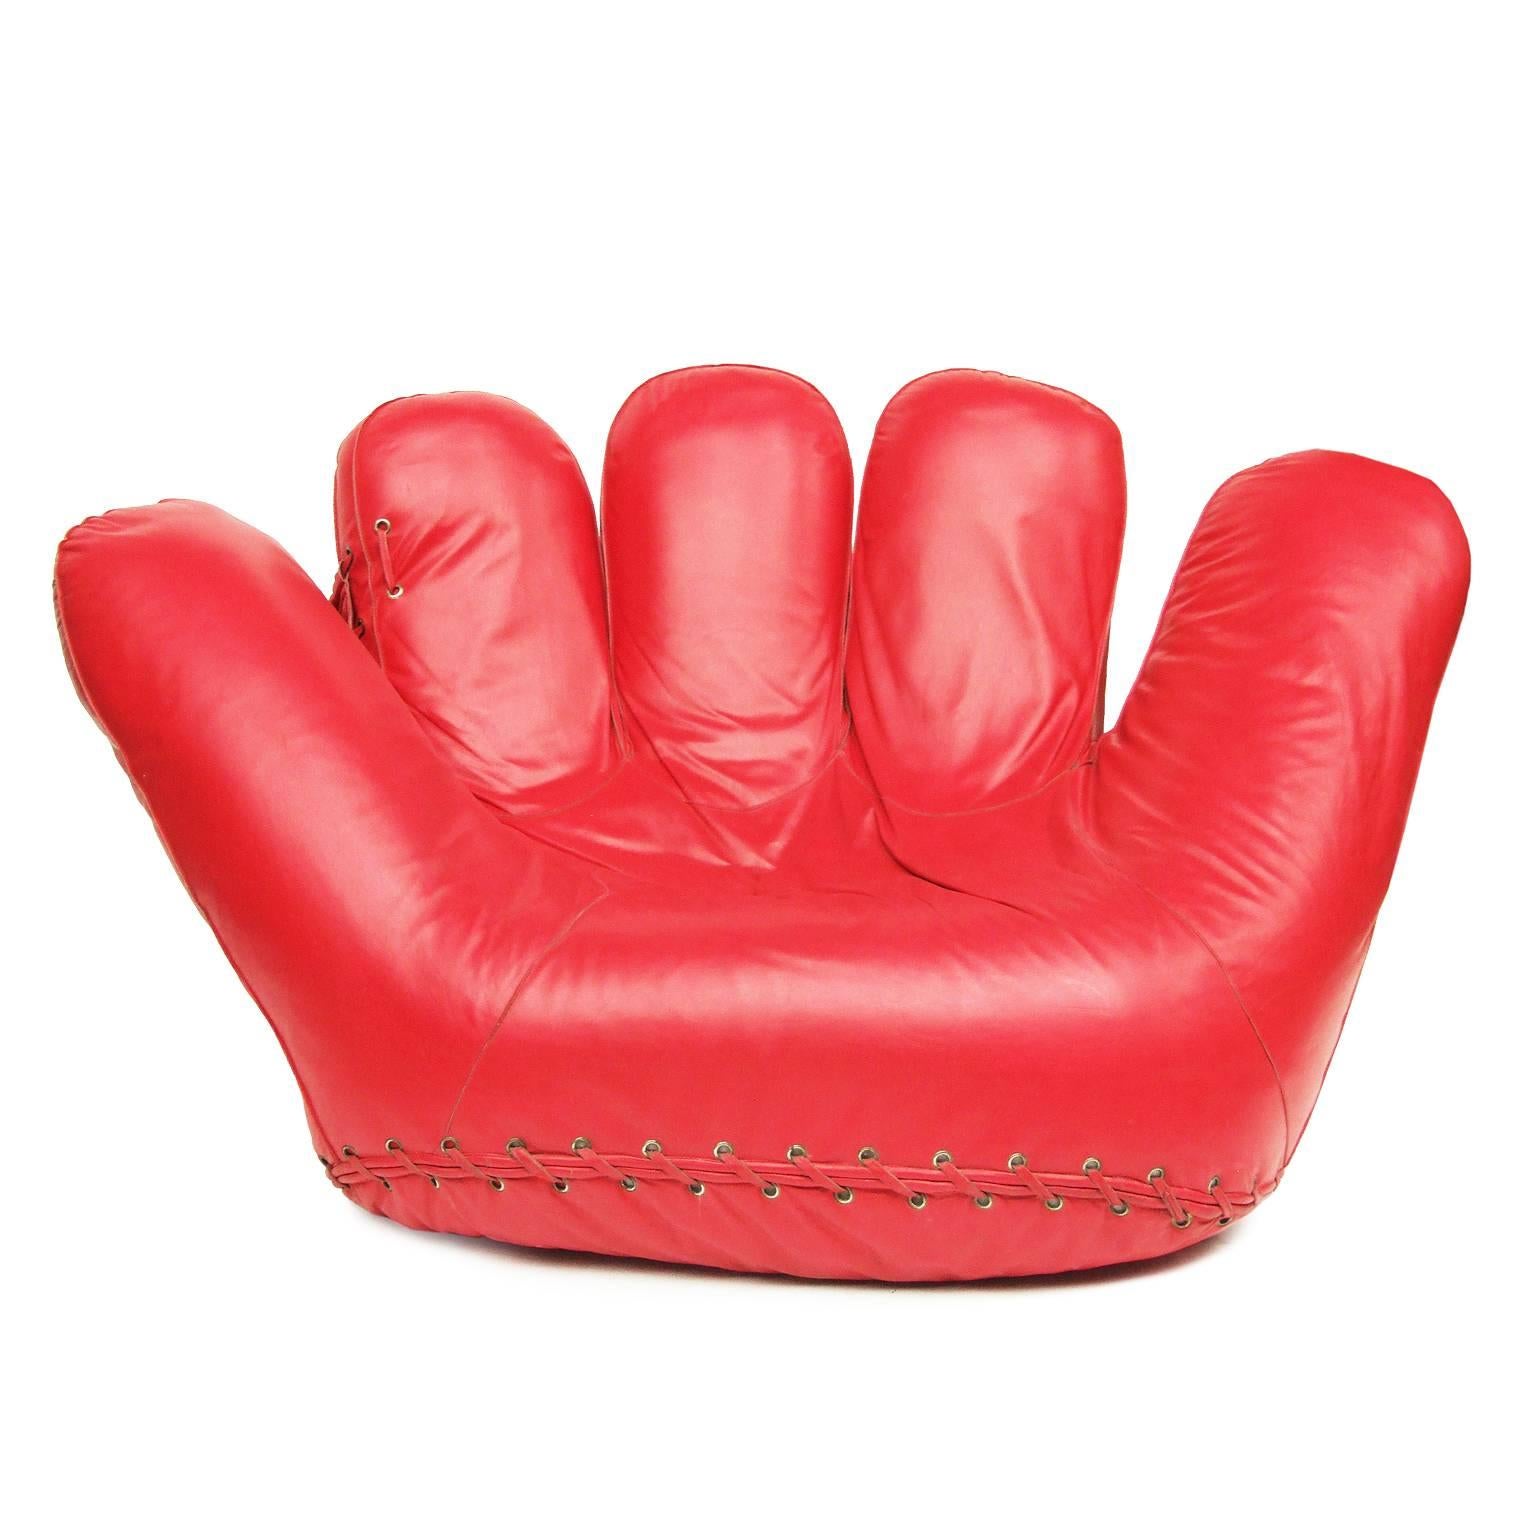 Baseball glove seat designed by Jonathan de Pas, Donato D'urbino and Paolo Lomazzi for Poltronova, Italy, 1970.

Polyurethane foam construction upholstered in rare red leather with brass eyelets. Four castors.

1980s edition.

Measures: H 86